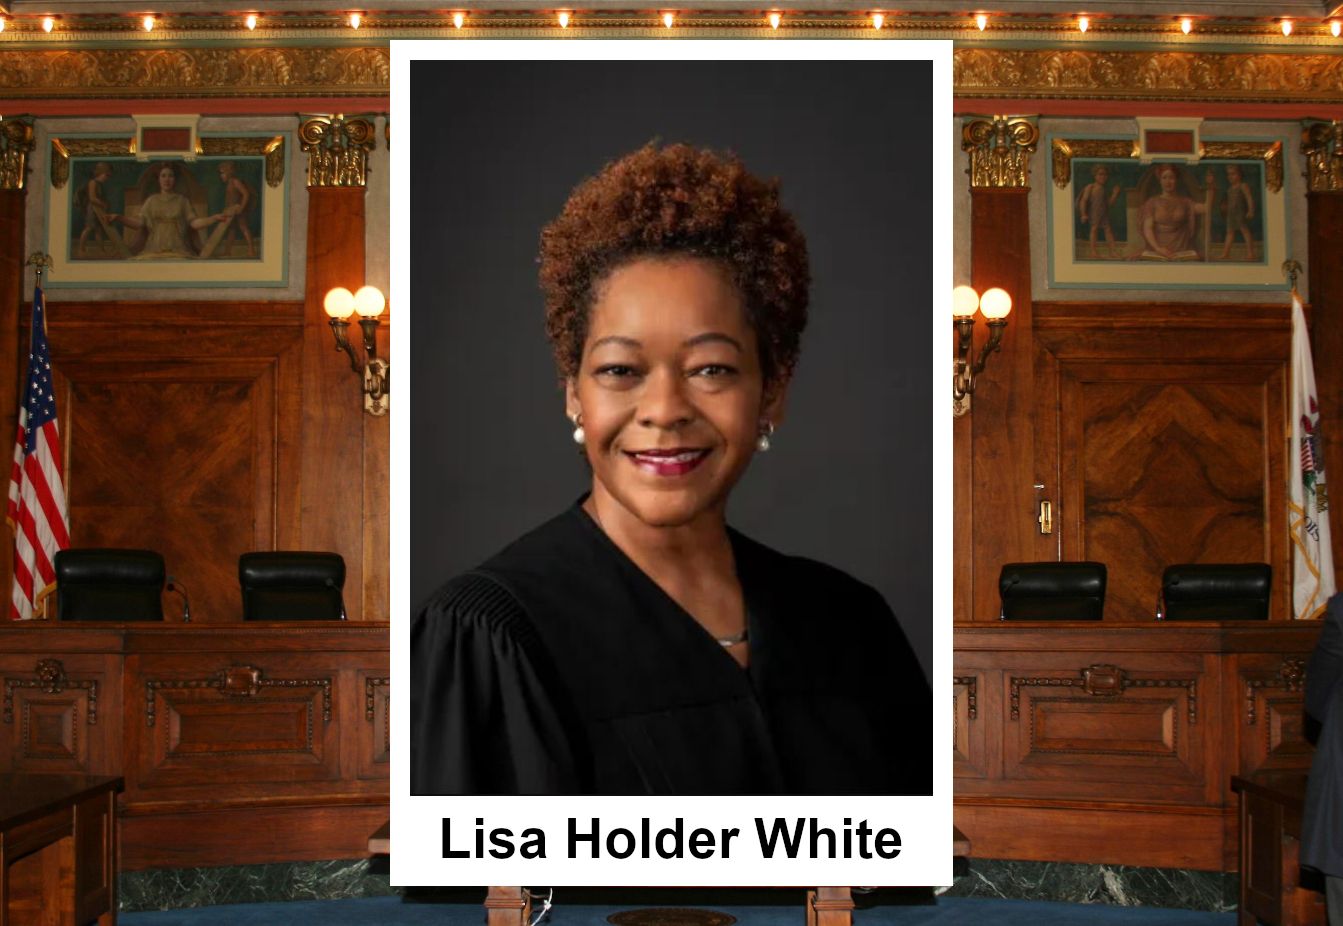 Holder White is state high court's 1st black woman justice